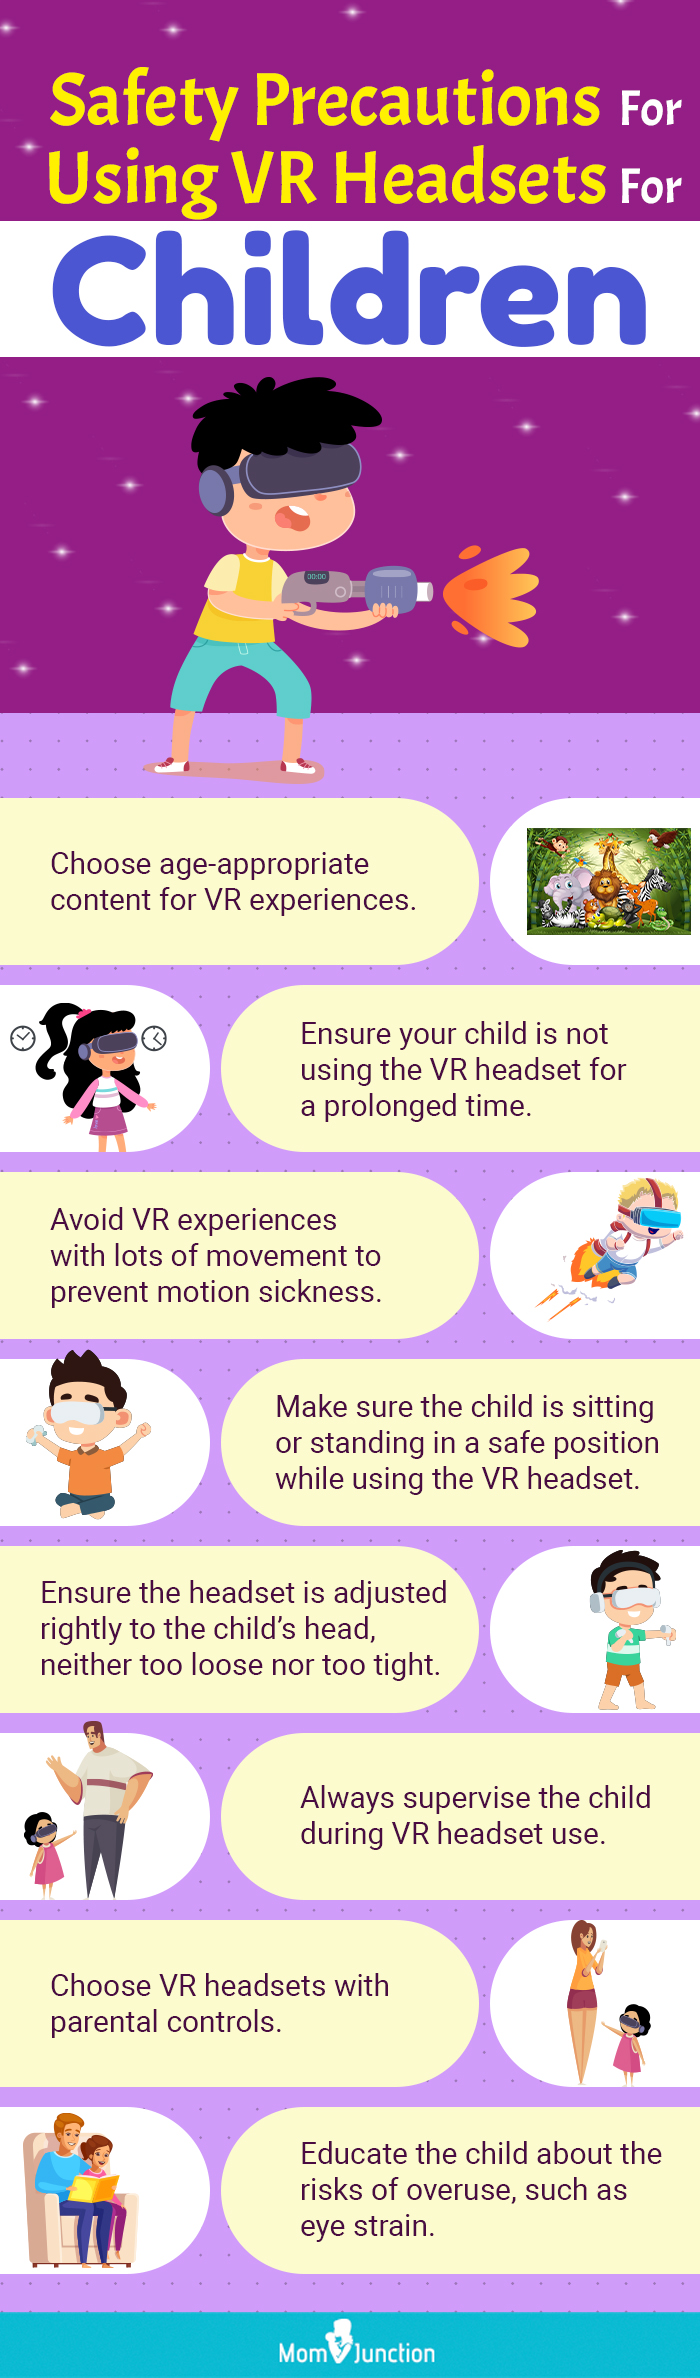 Safety Precautions For Using VR Headsets For Children (infographic)